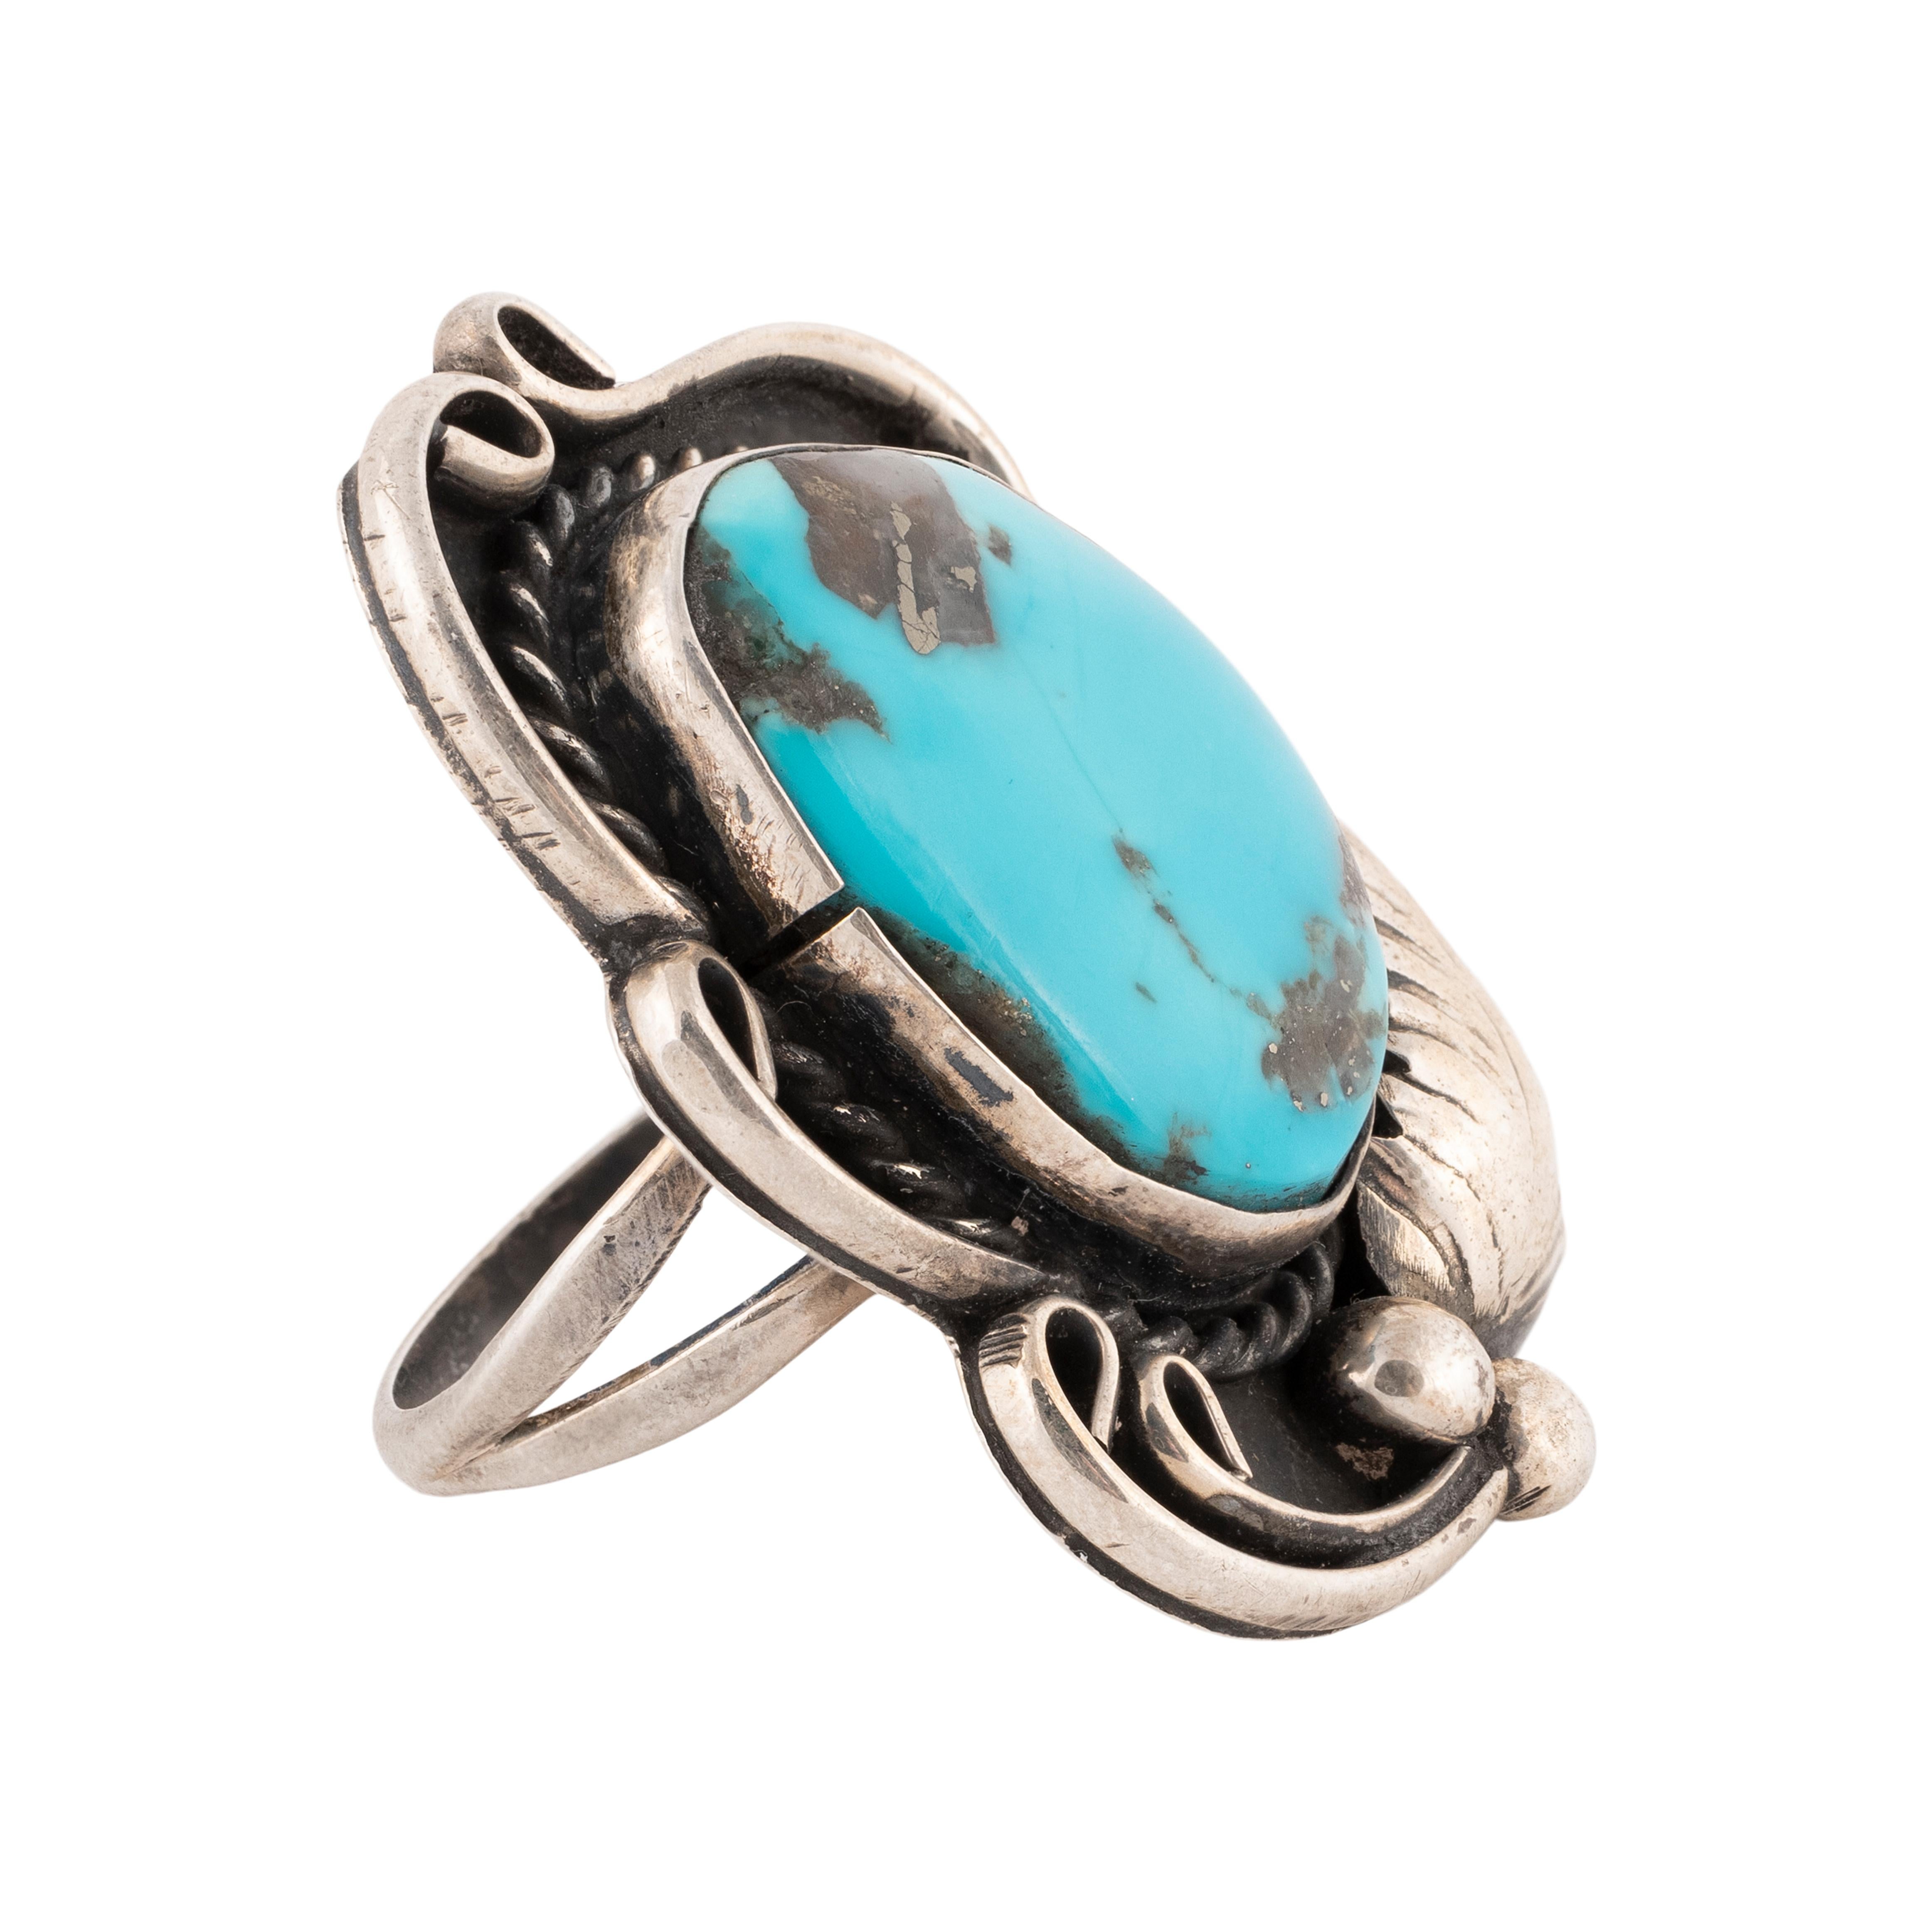 Navajo Morenci turquoise and sterling ring. Large stone set in shadow box design with classic twisted rope and leaf border.

PERIOD: After 1950

ORIGIN: Navajo, Southwest

SIZE: Size 8, Face 1.5